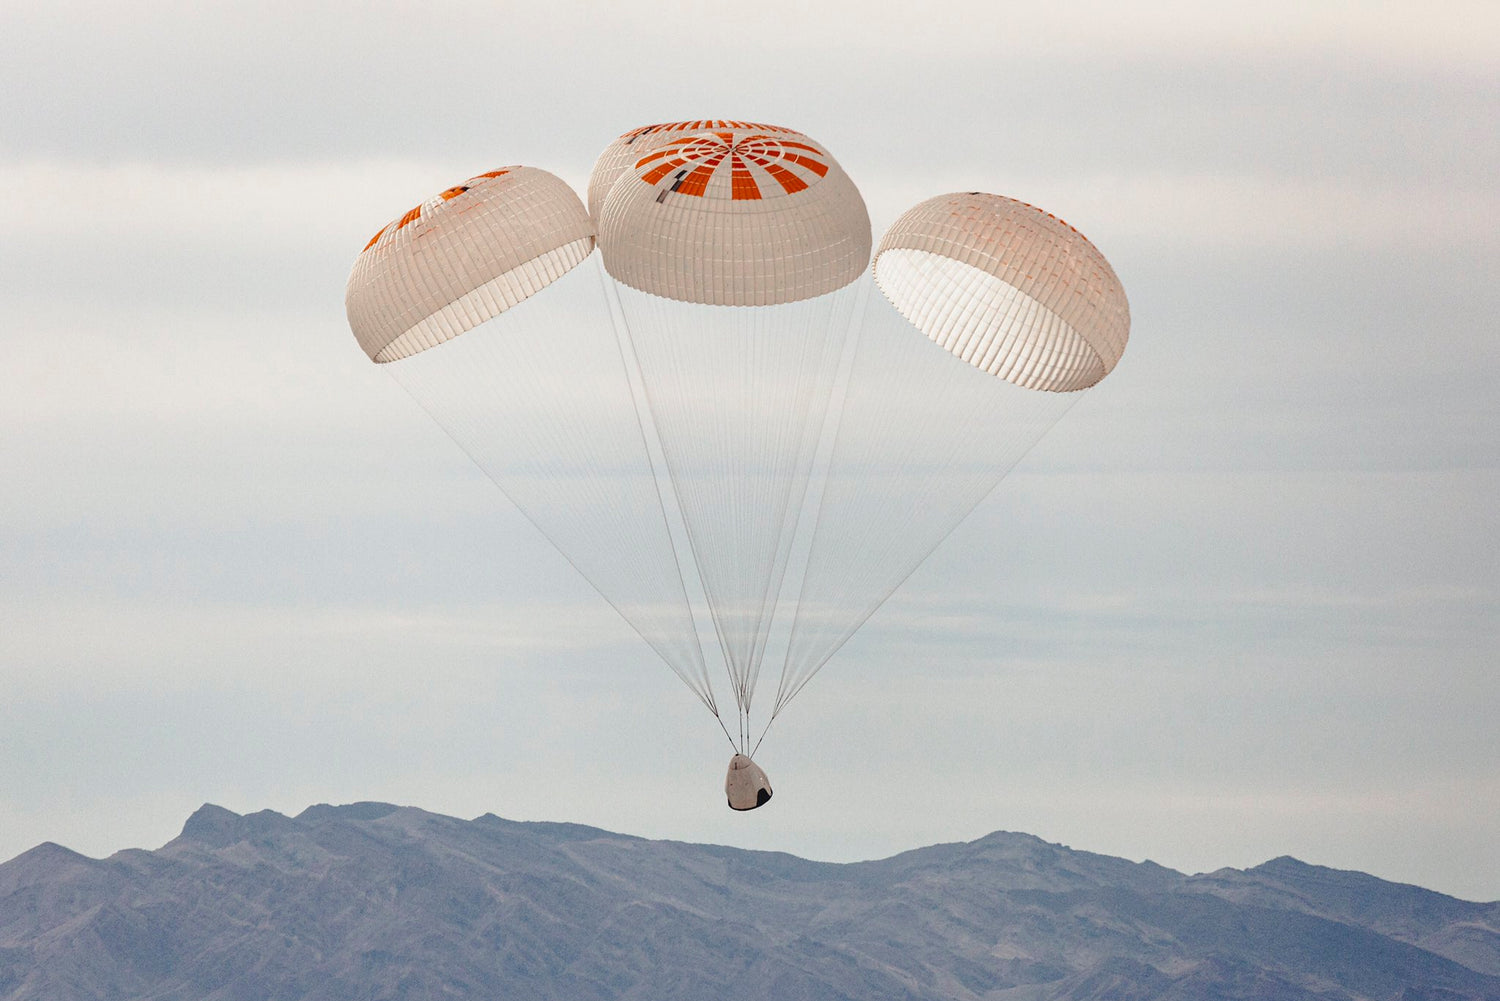 SpaceX will perform final Crew Dragon parachute tests with a C-130 cargo plane